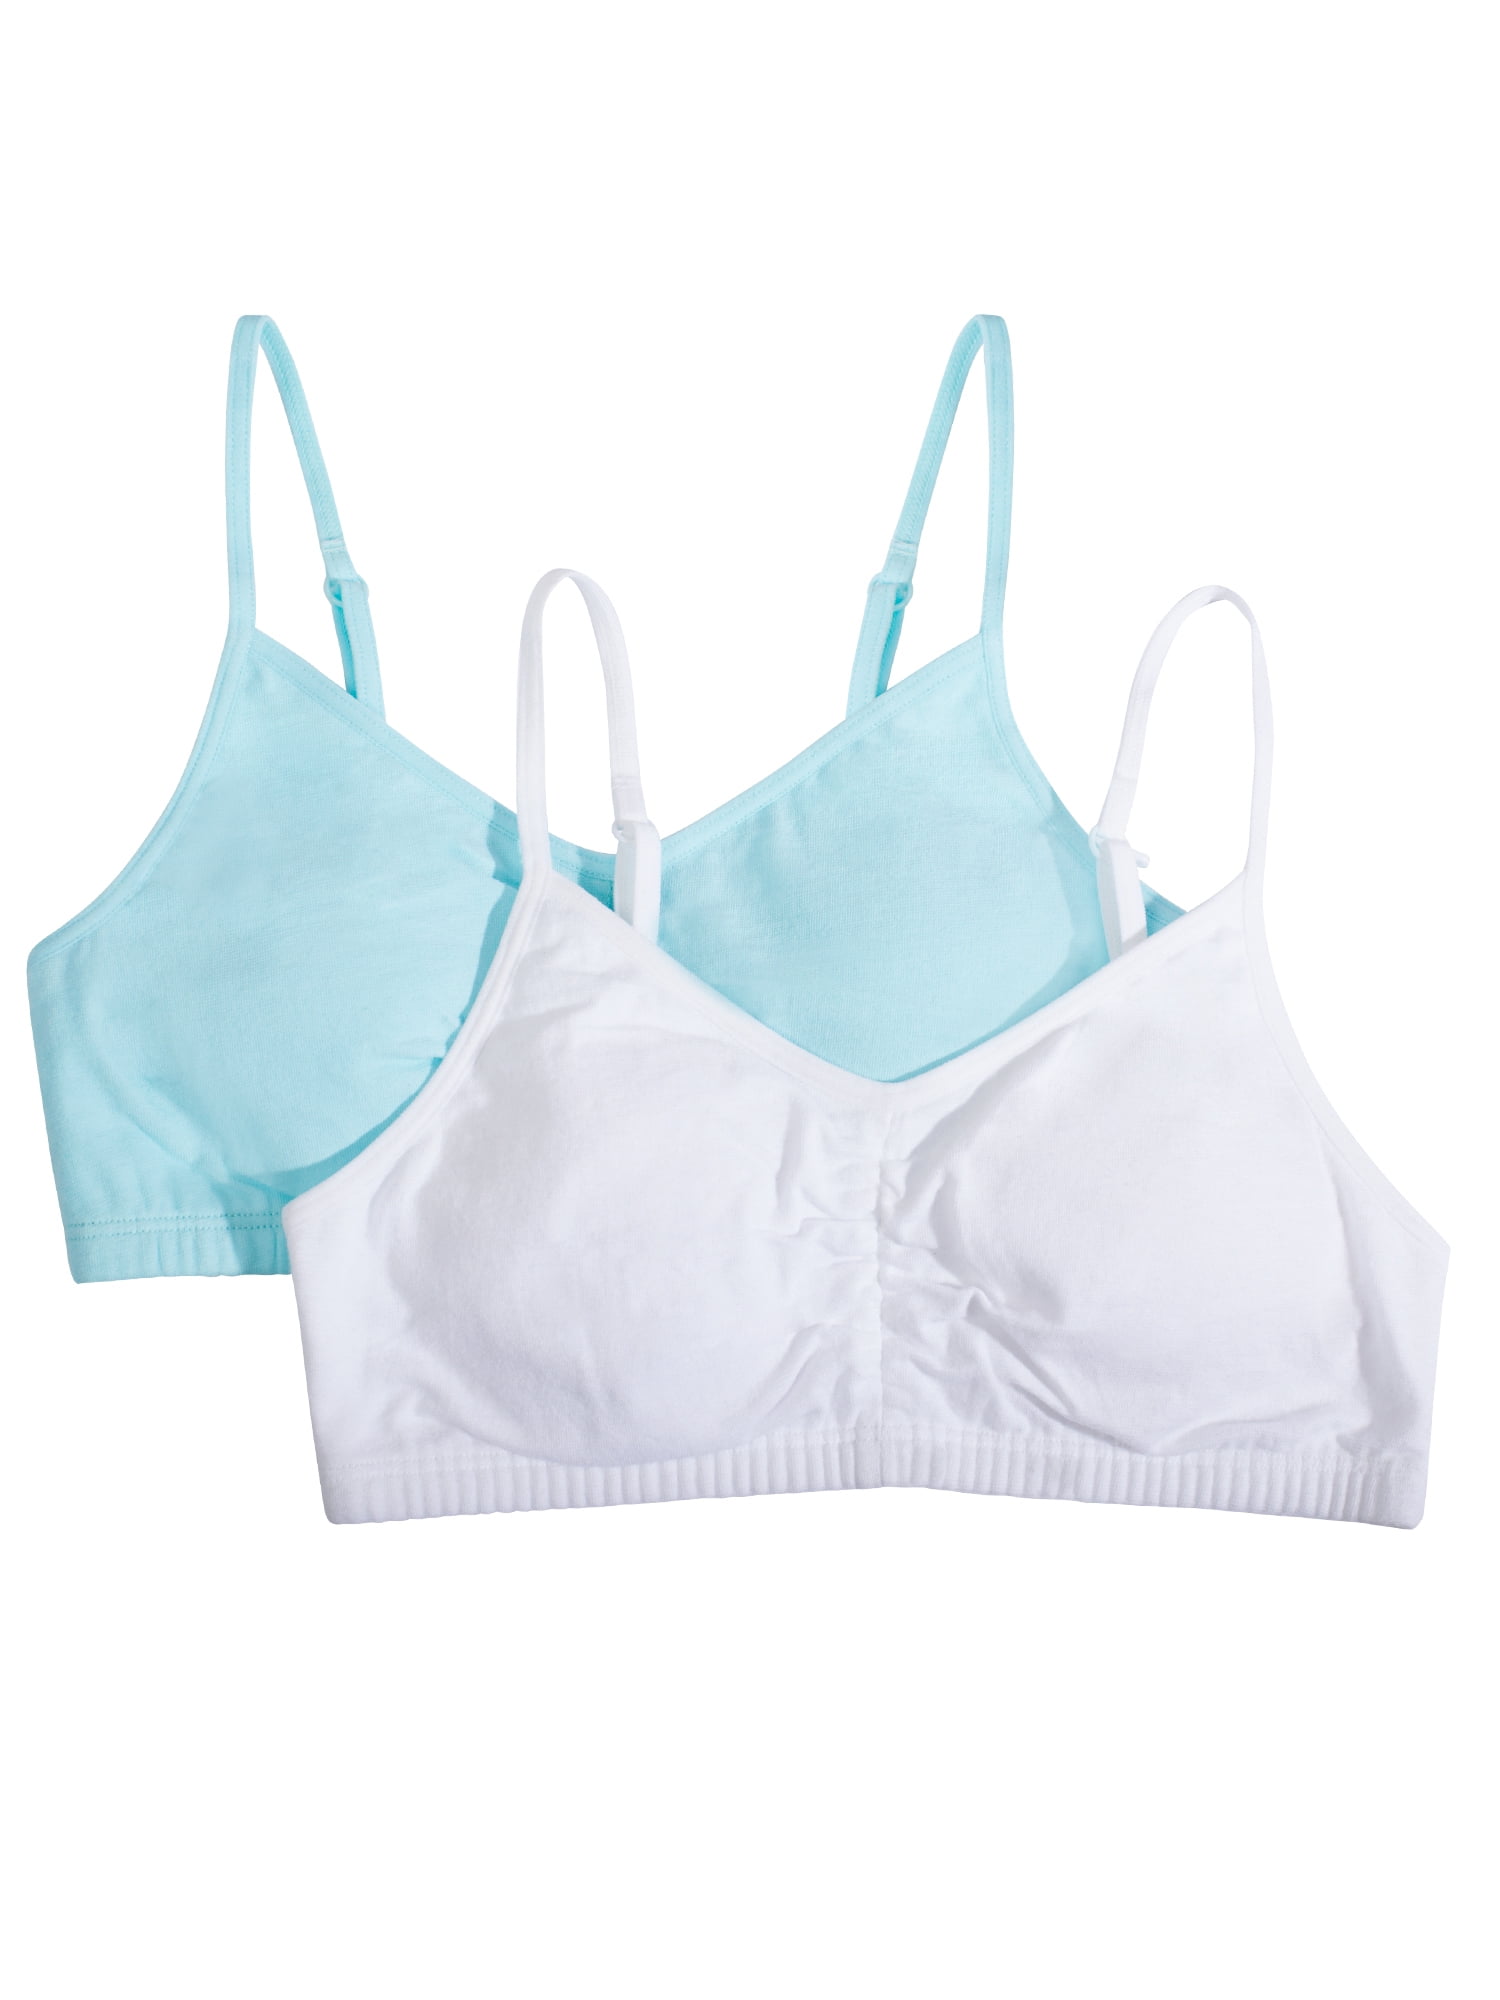 Pack of 2 Fruit of the Loom Big Girls' Seamless Crop with Cookies 